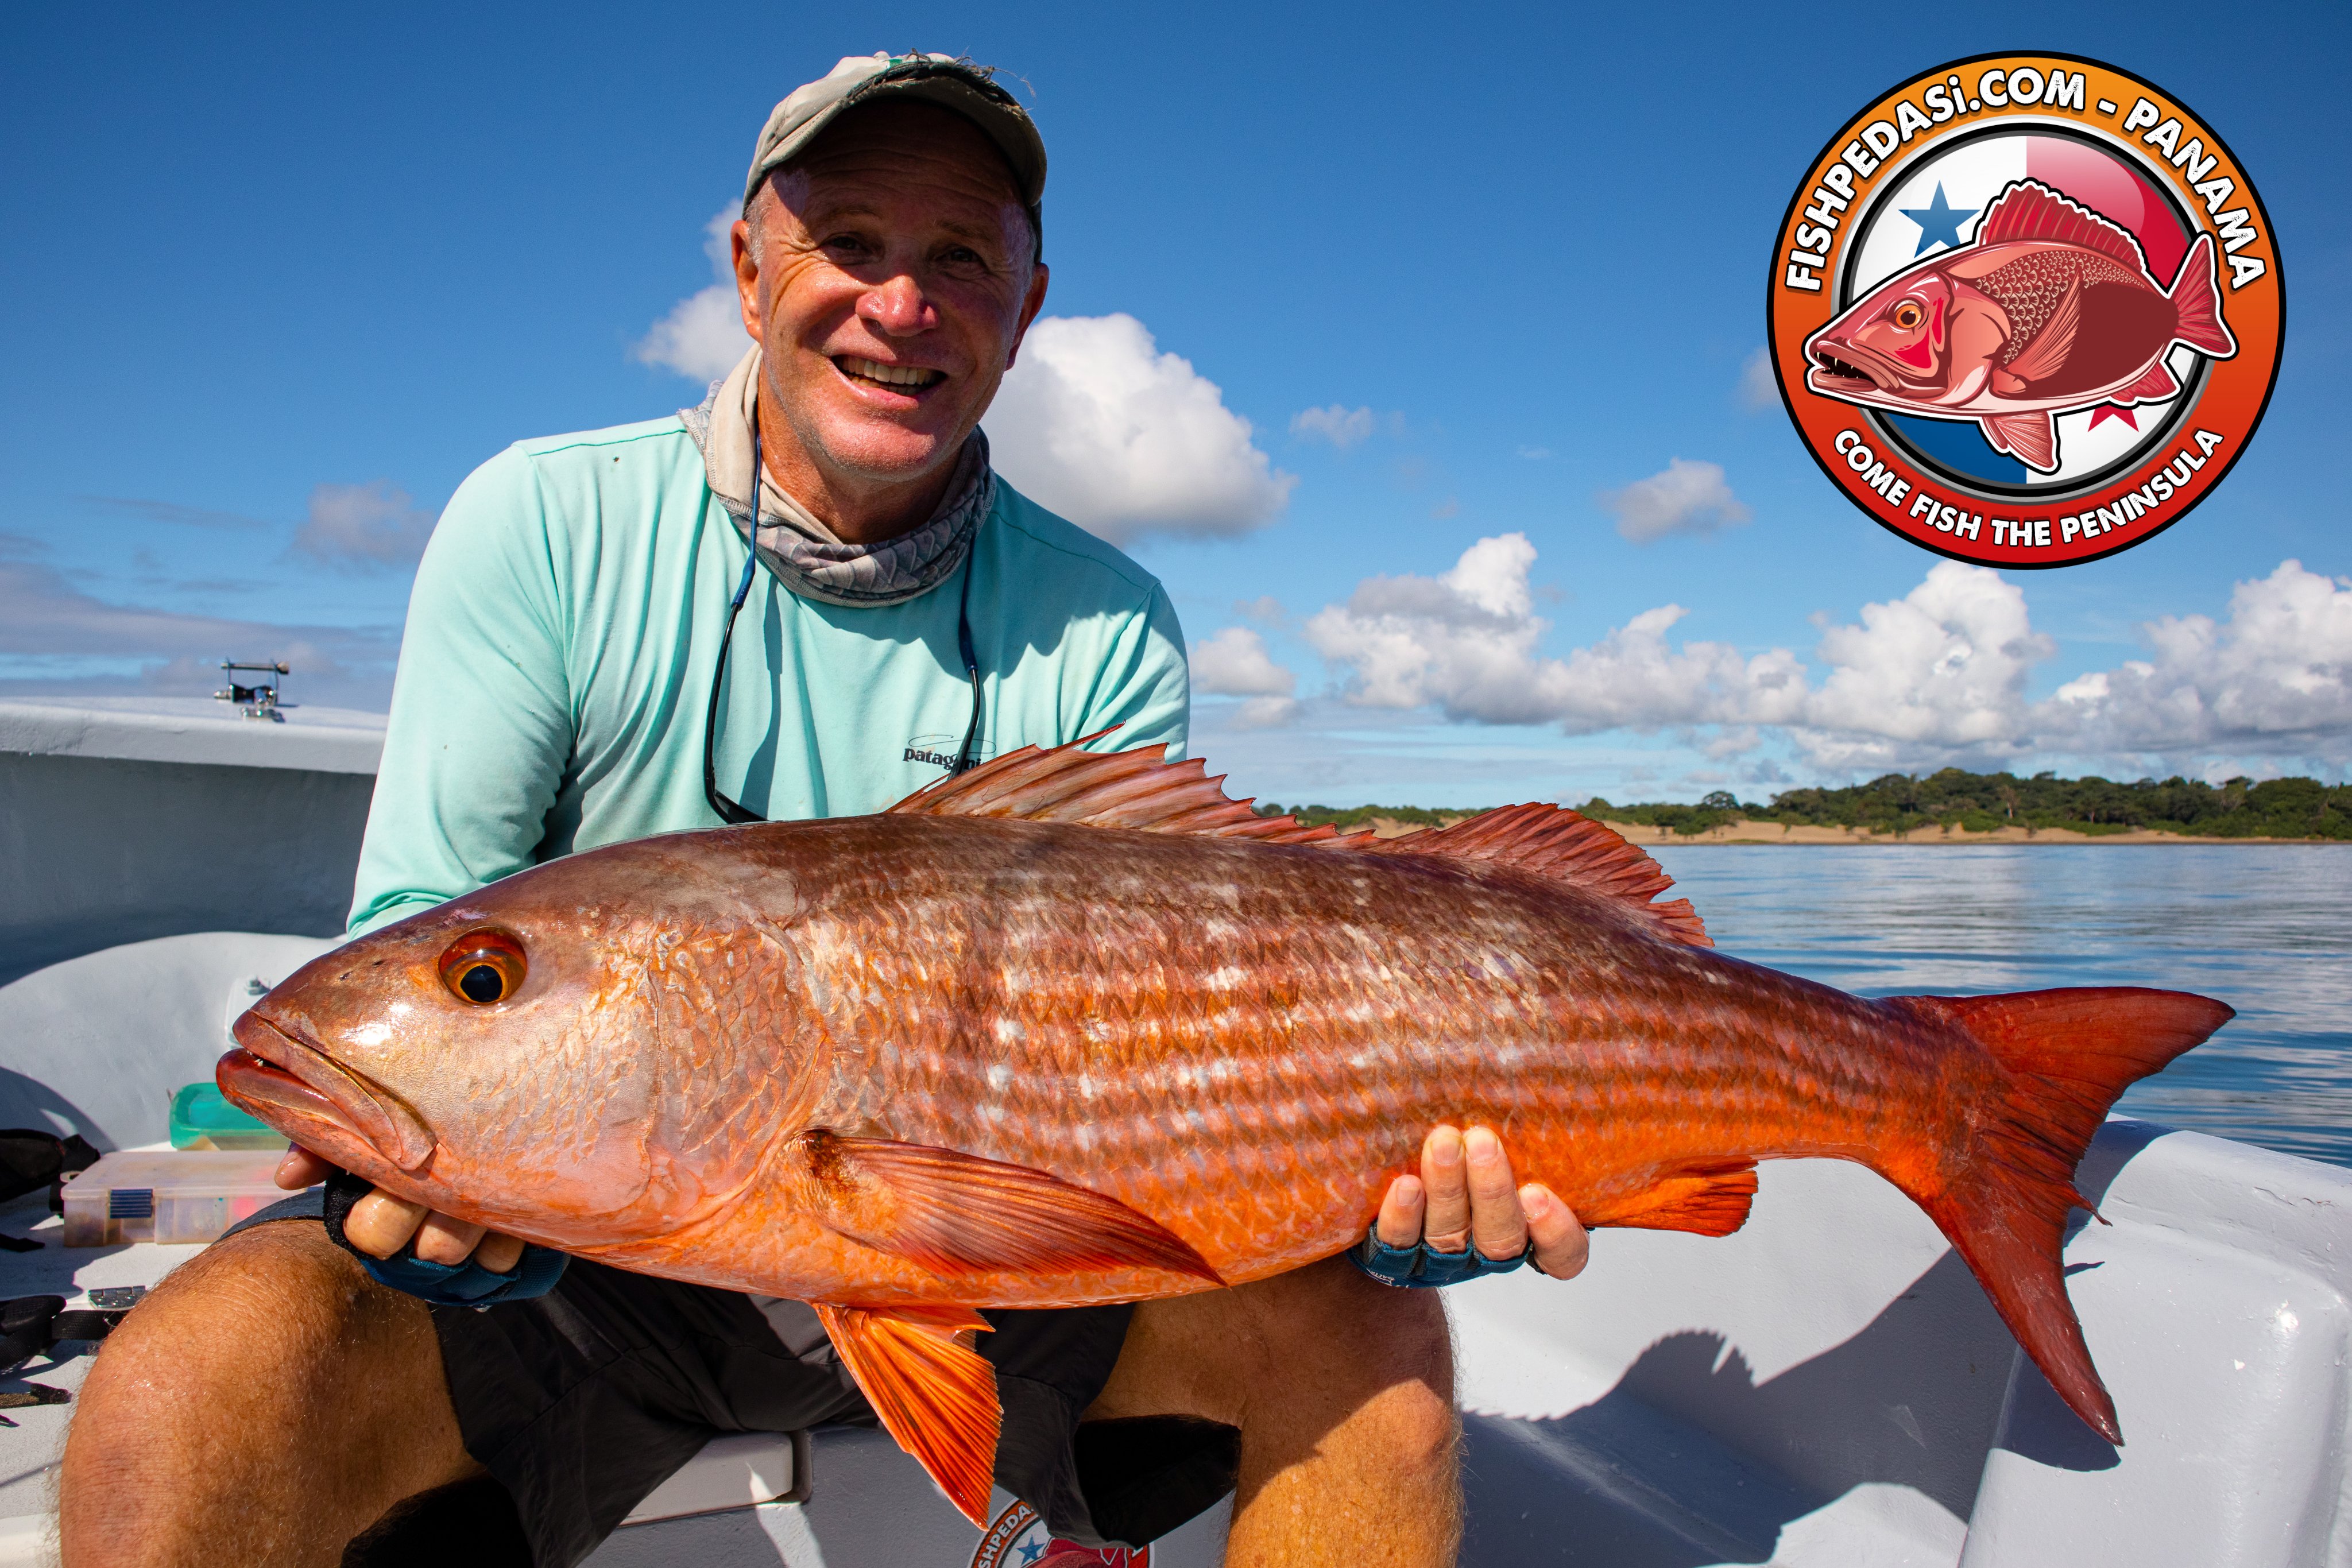 FISH PEDASi - PANAMA on X: Snapper fishing on the reefs has been great on  the jigs recently. These fish fight so hard and eat so well! What's not to  like! #fishpedasi